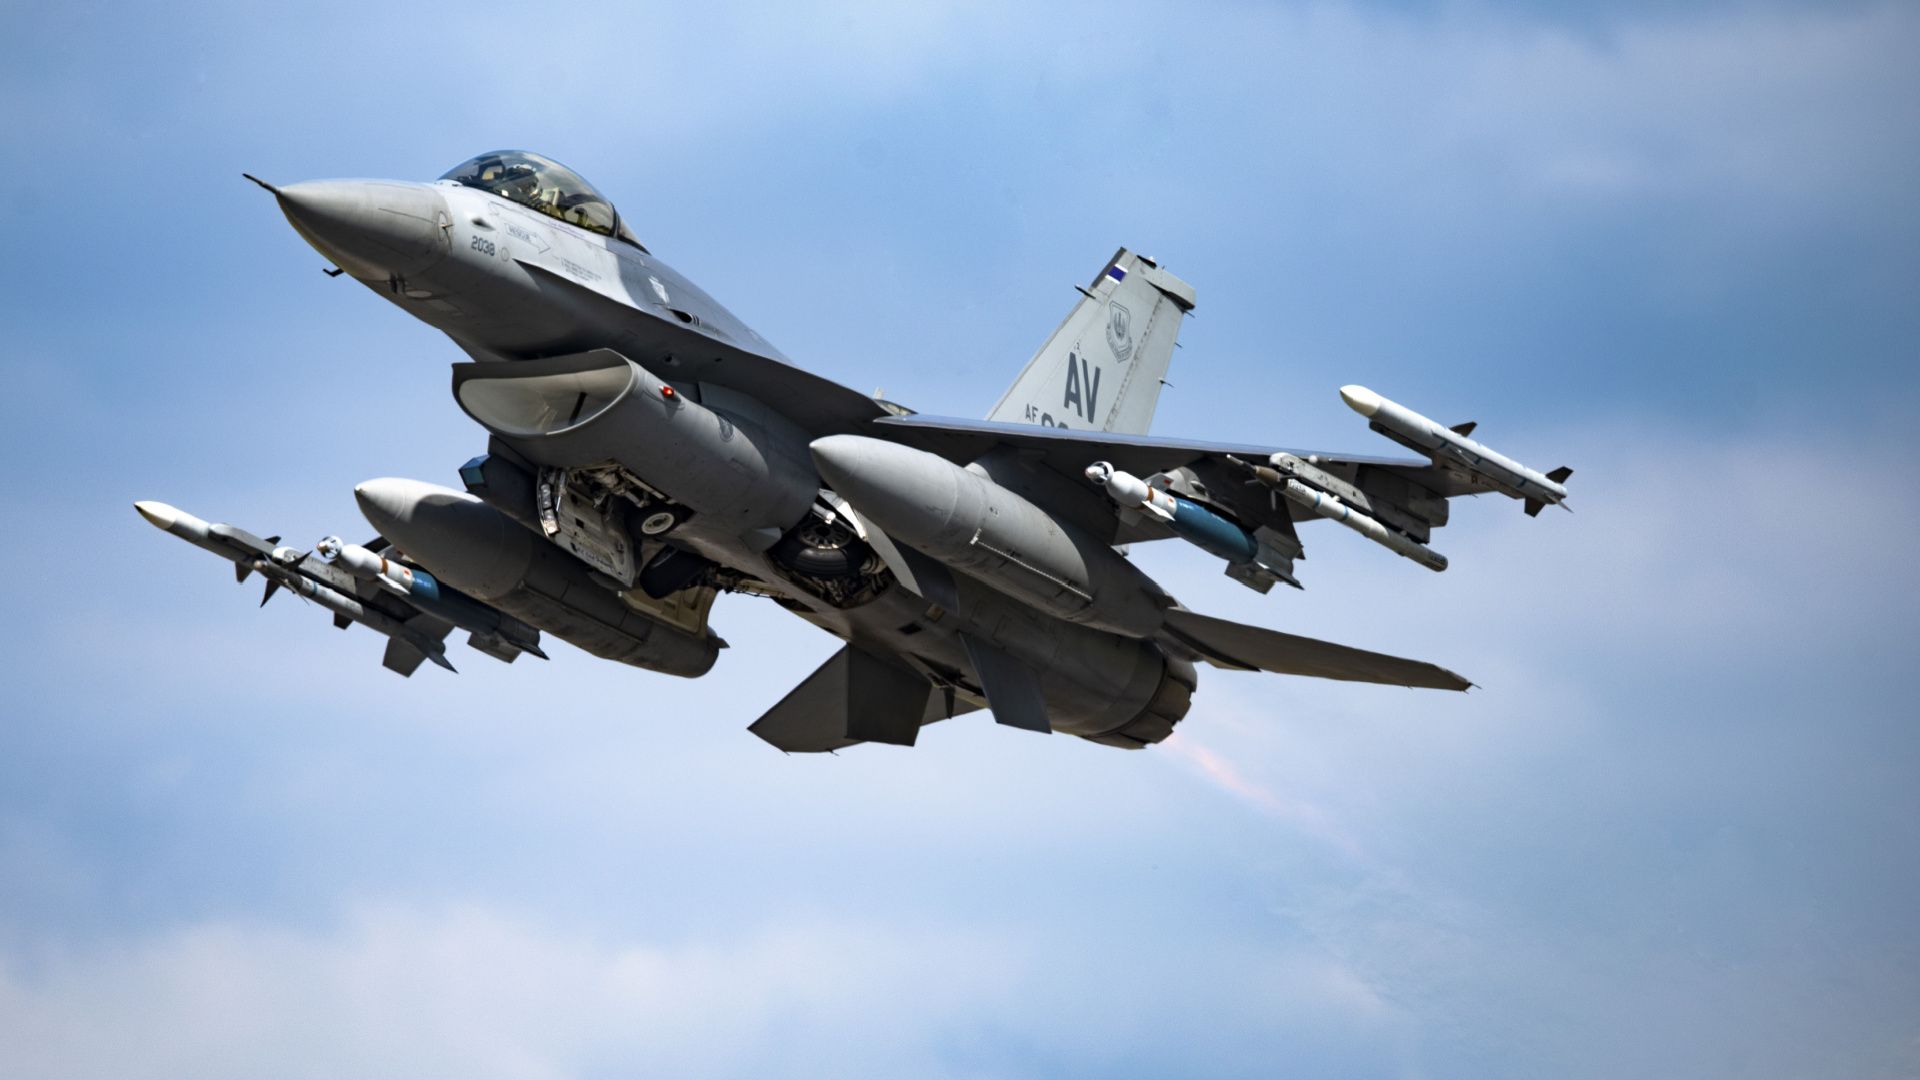 How Much Does An F-16 Cost?